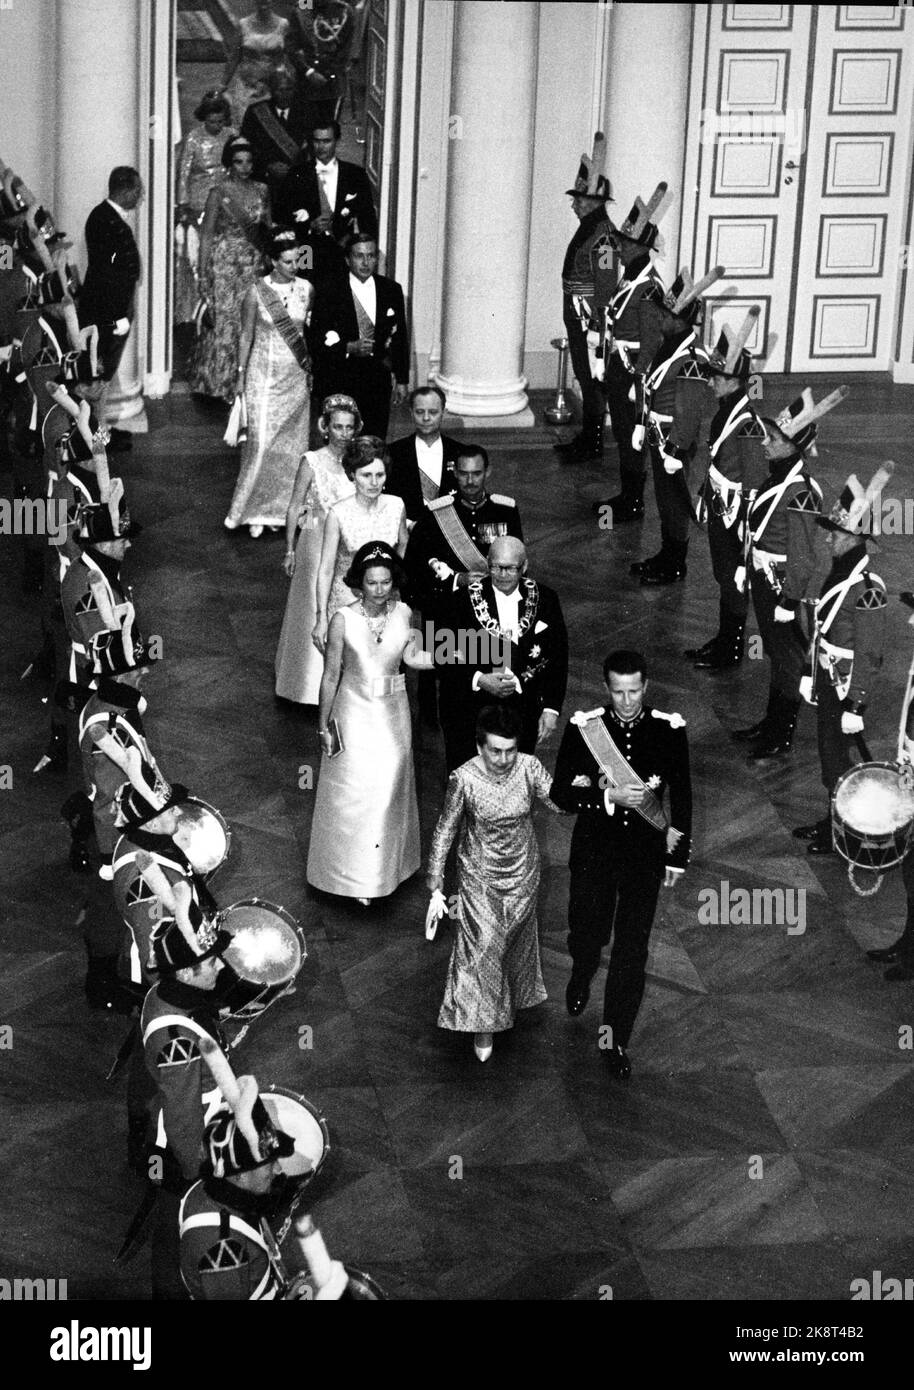 Oslo 1968-08-29: Royal Norwegian wedding. Crown Prince Harald marries Sonja Haraldsen. Here are the guests to the castle. Tighten garden soldiers in neat ranks on each side of the guests. NTB archive photo / NTB Stock Photo